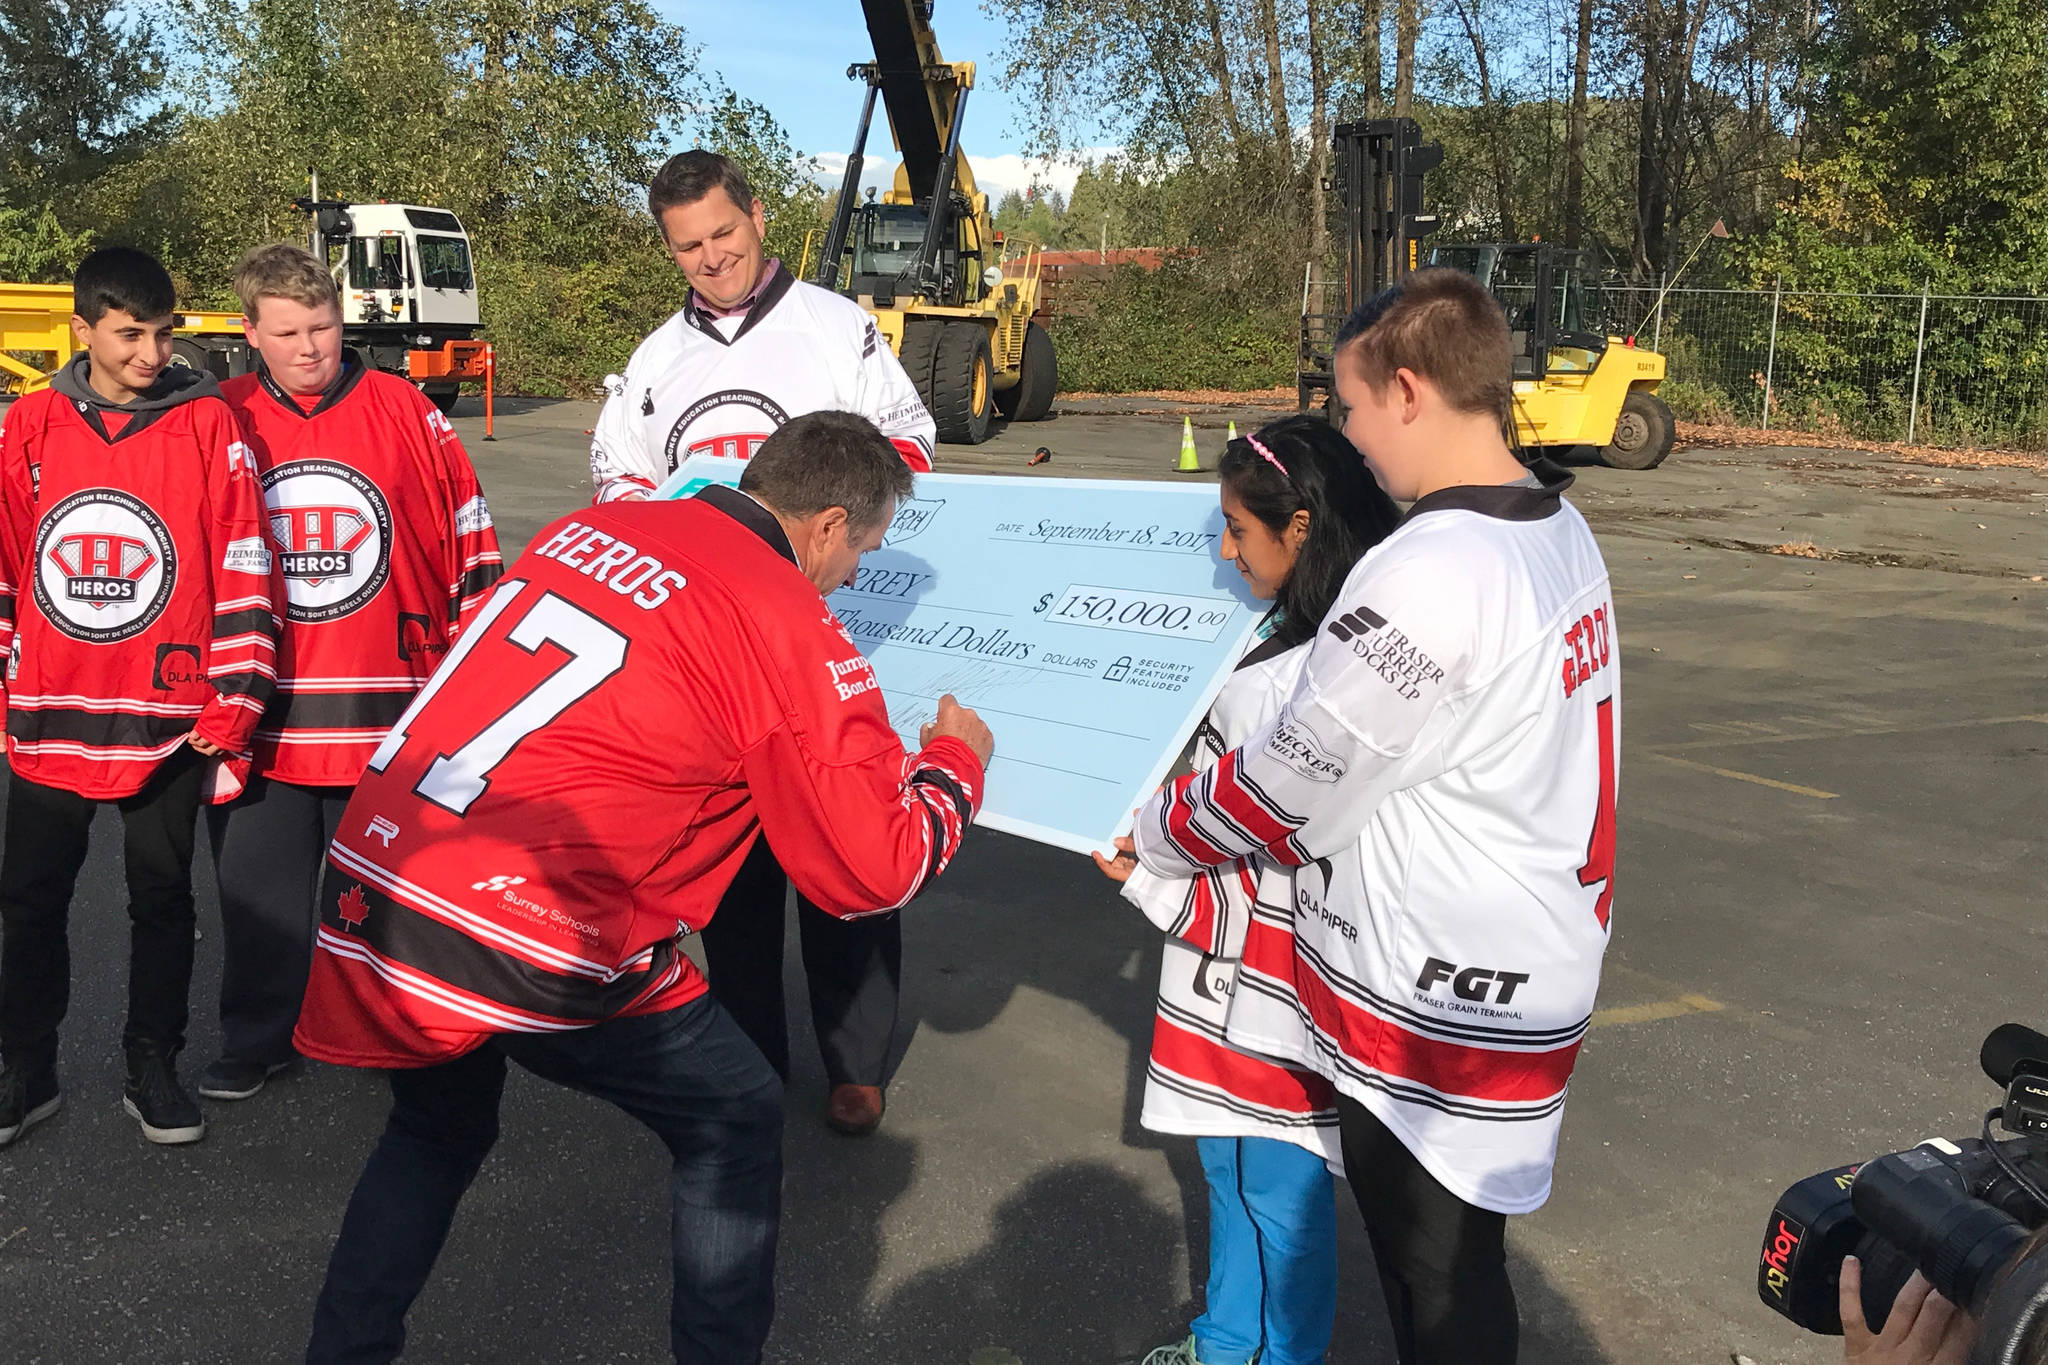 8611691_web1_Casey-McCawley-FGT_signs-150K-donation-cheque